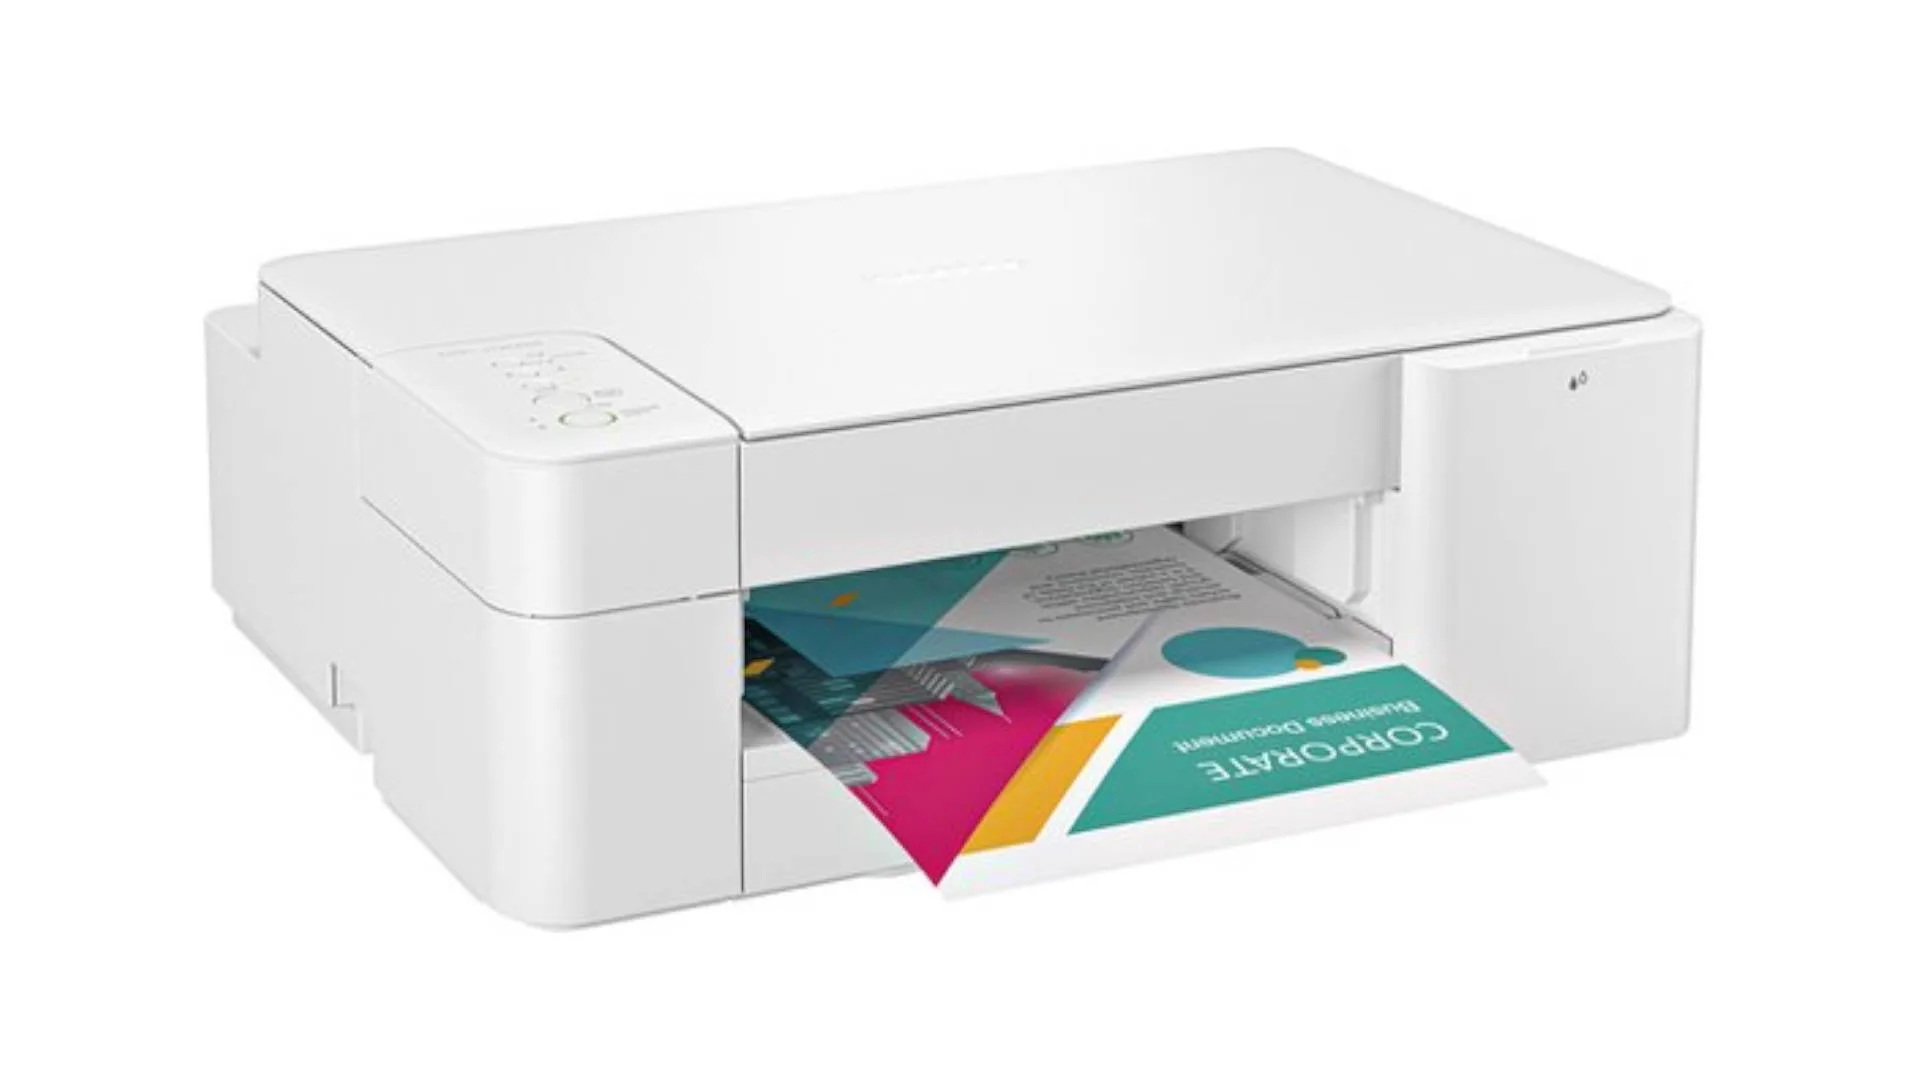 BROTHER All-in-one printer DCP-J1200DW Wit